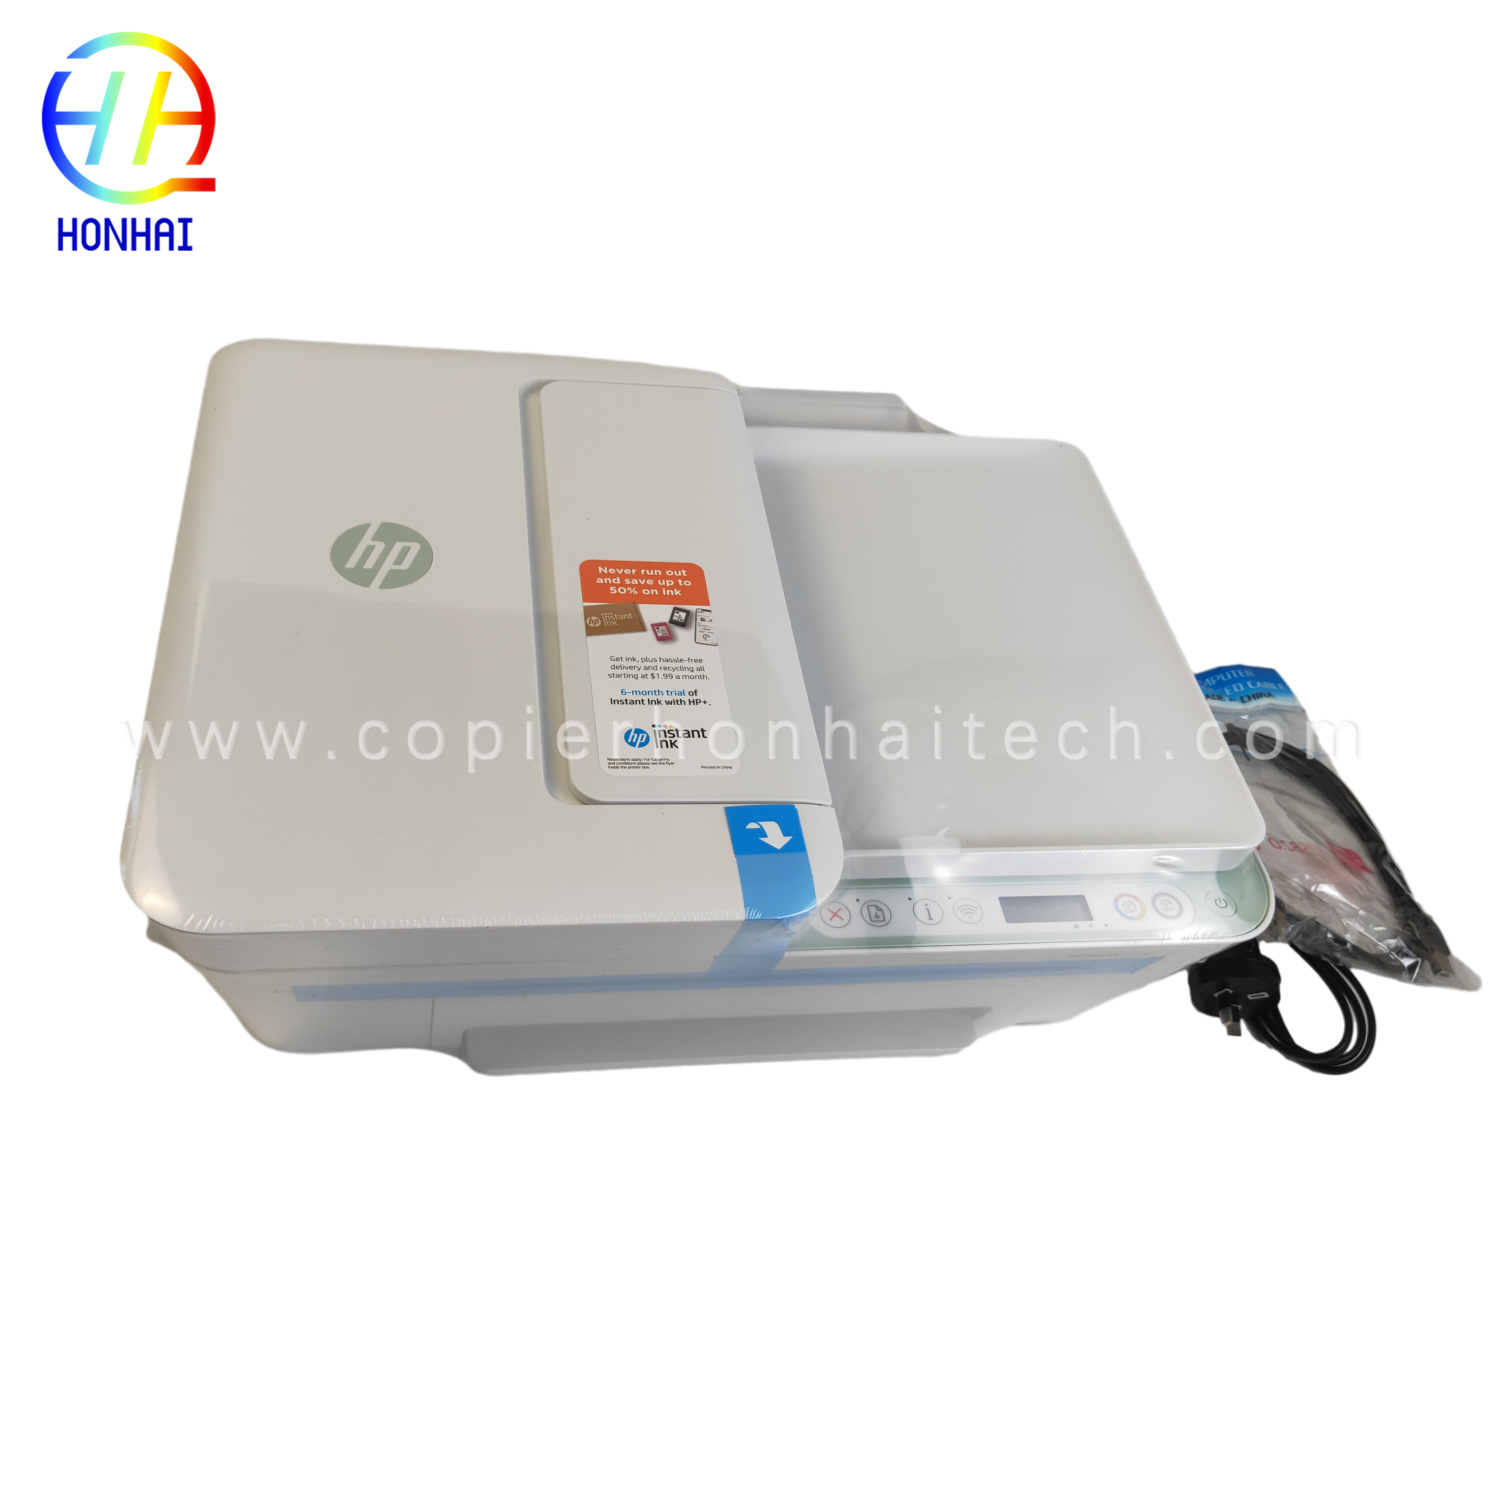 https://www.copierhonhaitech.com/original-new-wireless-printer-for-hp-deskjet-4122e-all-in-one-printer-scan-and-copy-home-office-students-and-home- nyomtató-26q96a-termék/